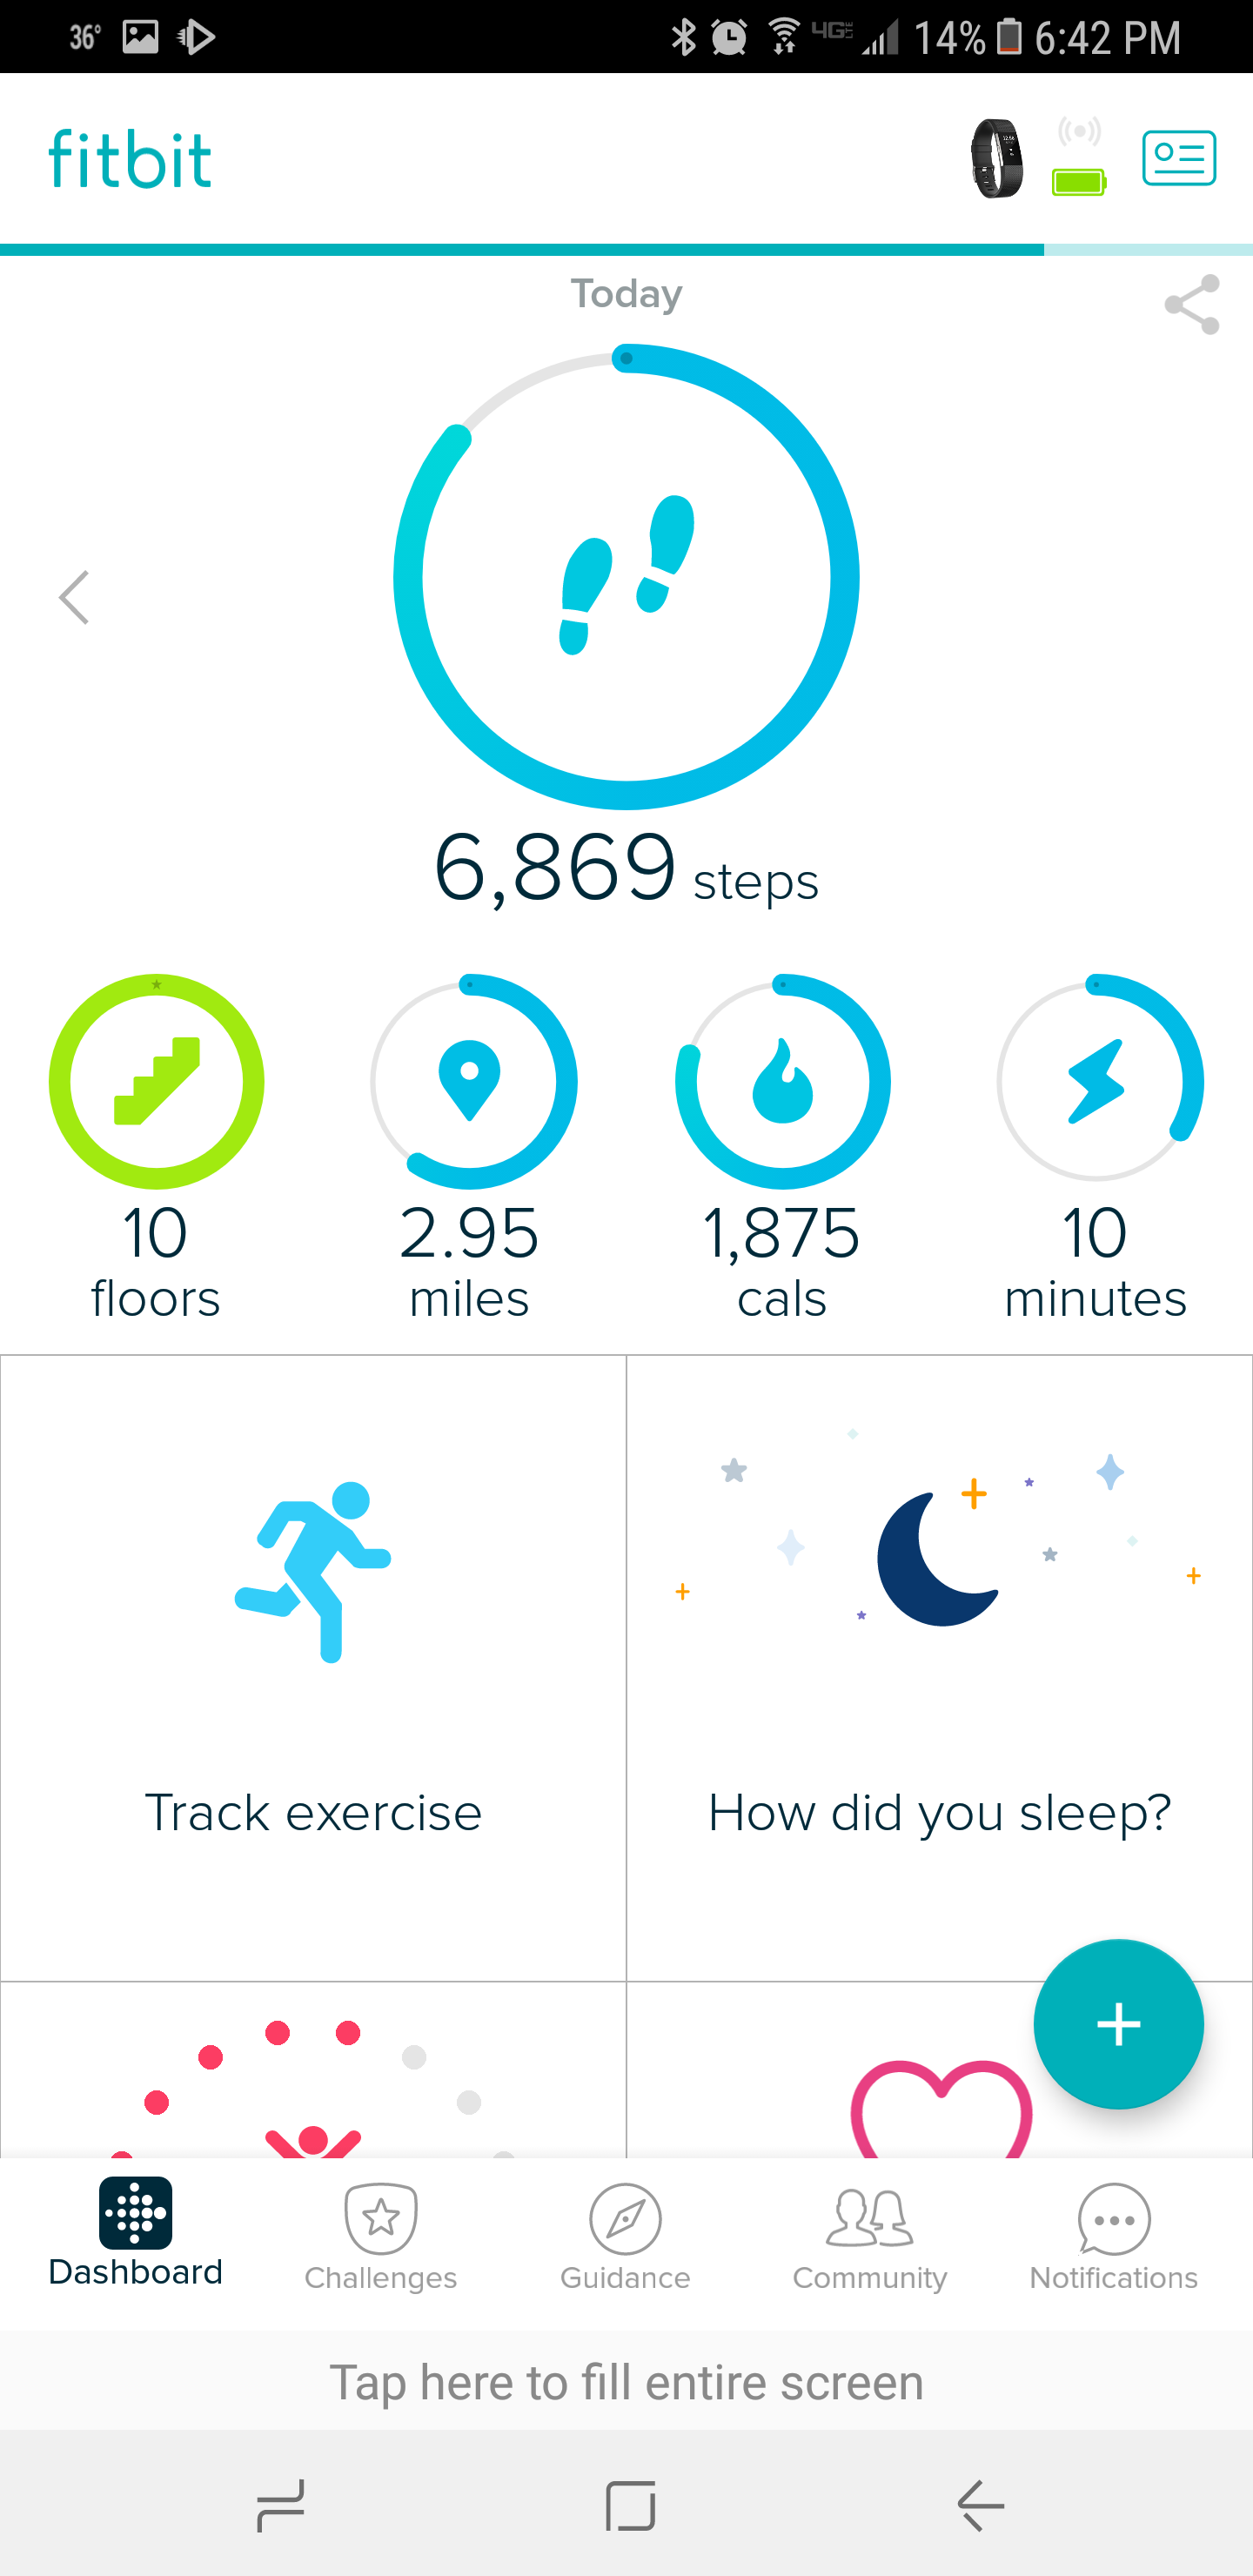 fitbit overestimating calories